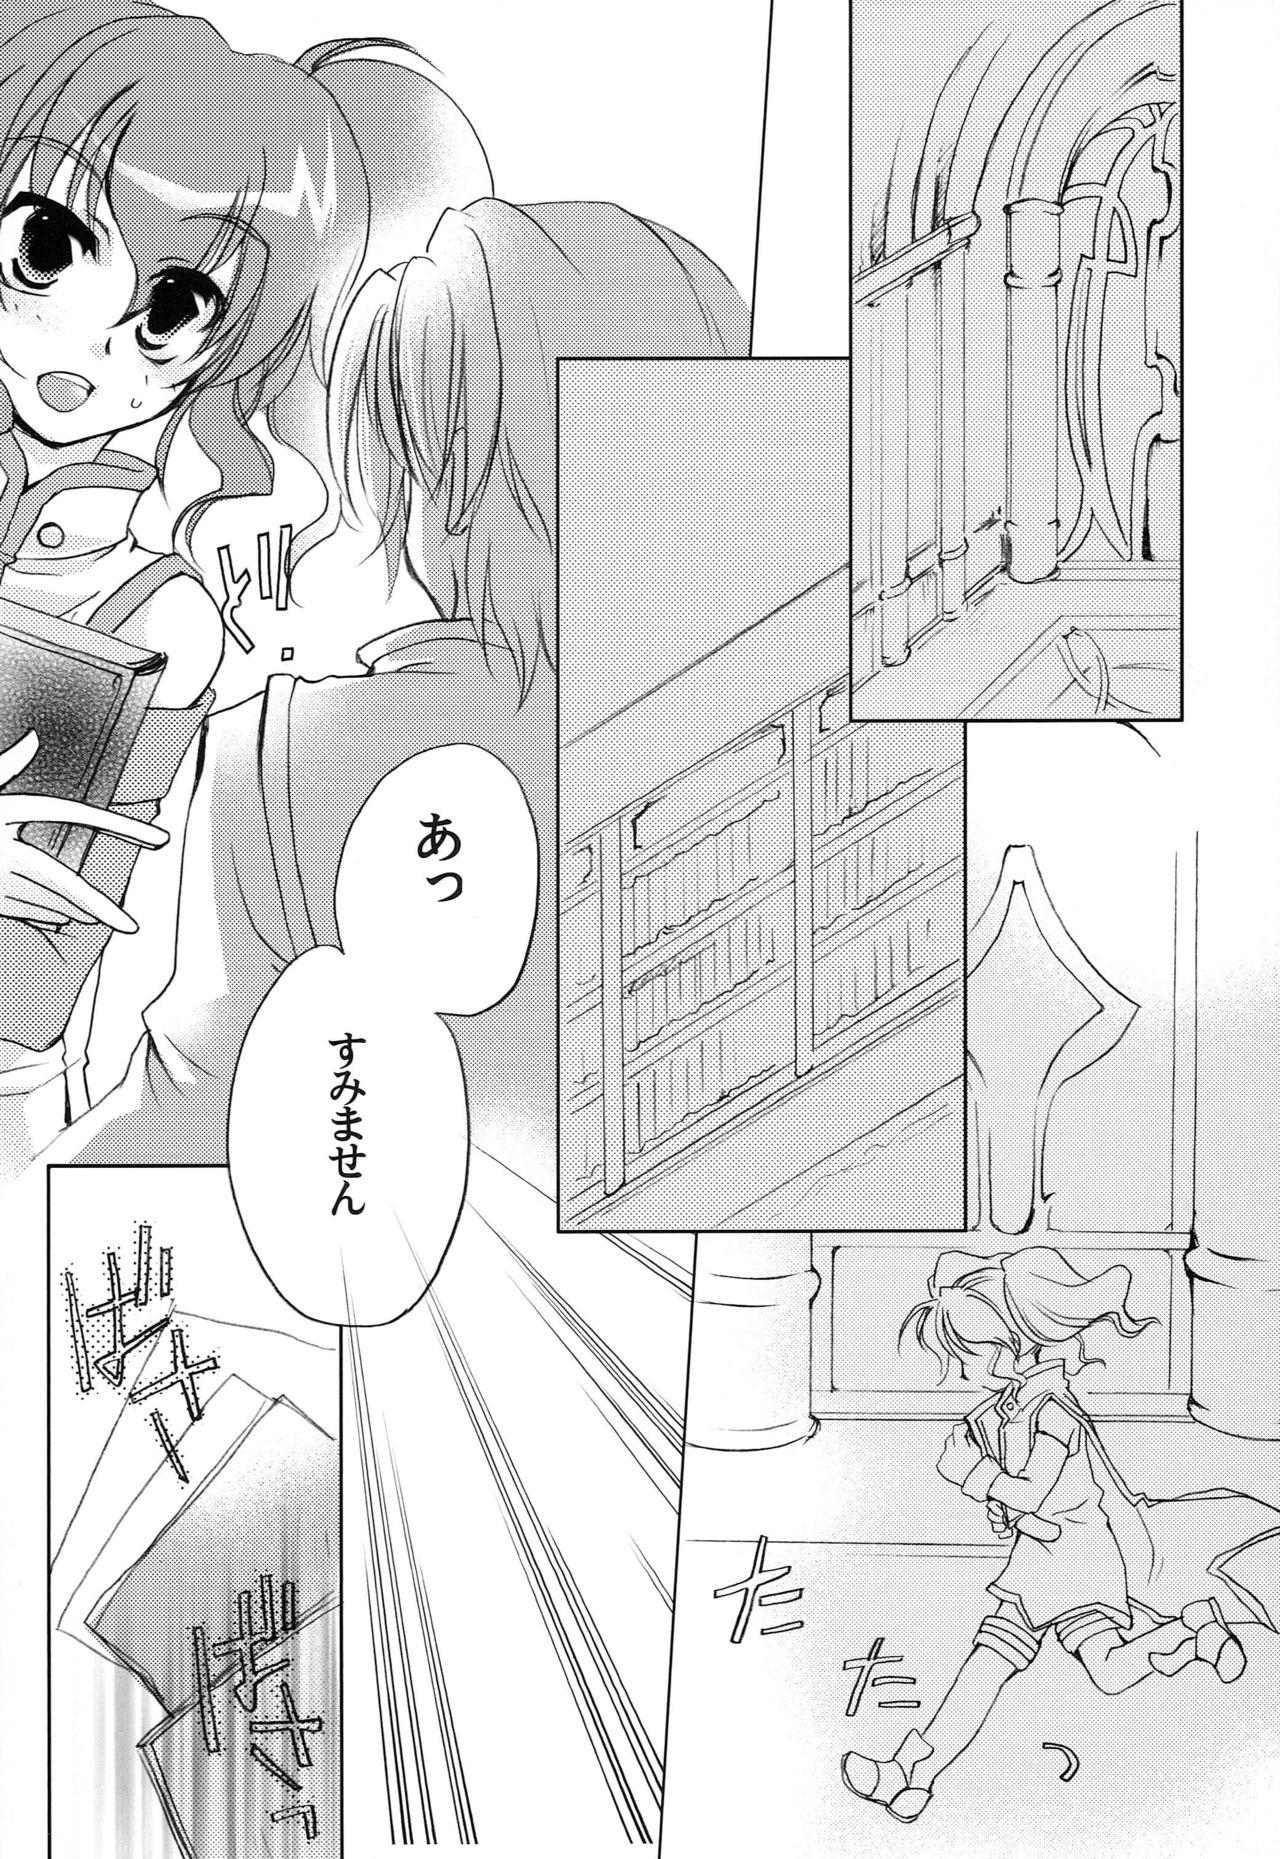 Teenie Carnation, Lily, Lily, Rose - Tales of the abyss Rabo - Page 3